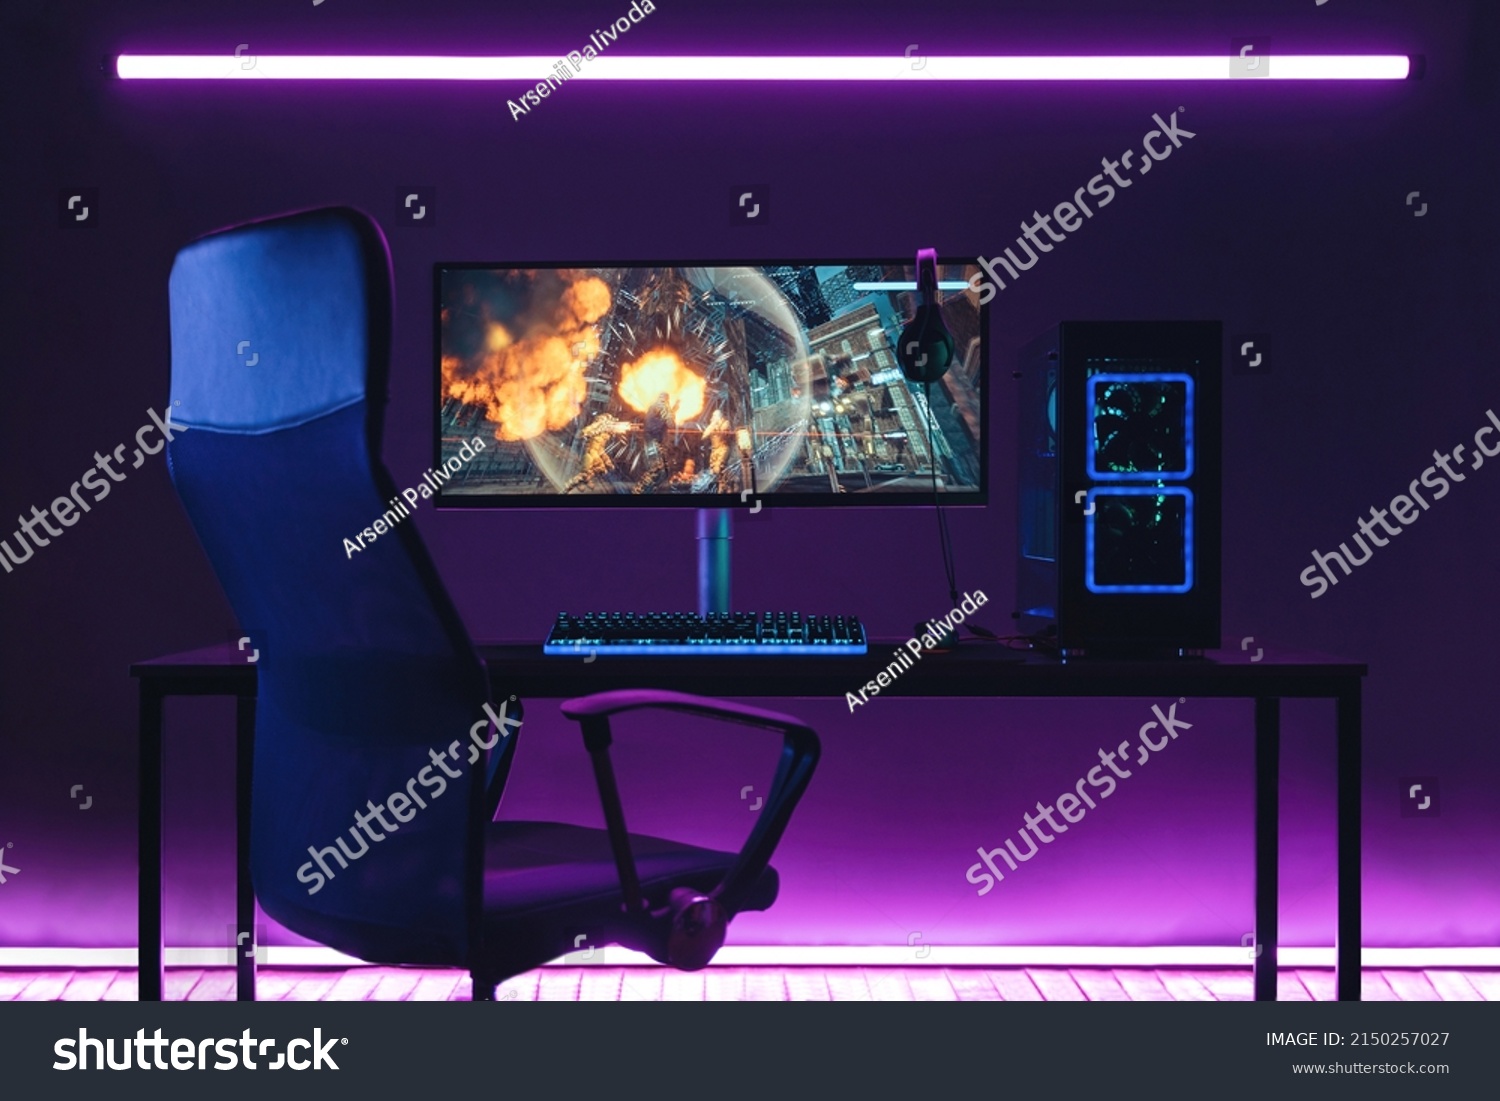 General view of home workplace of pro gamer with professional gaming setup on desktop. Modern powerful PC full RGB light inside, display with shooter game, armchair. Gaming studio of cyber sportsman #2150257027